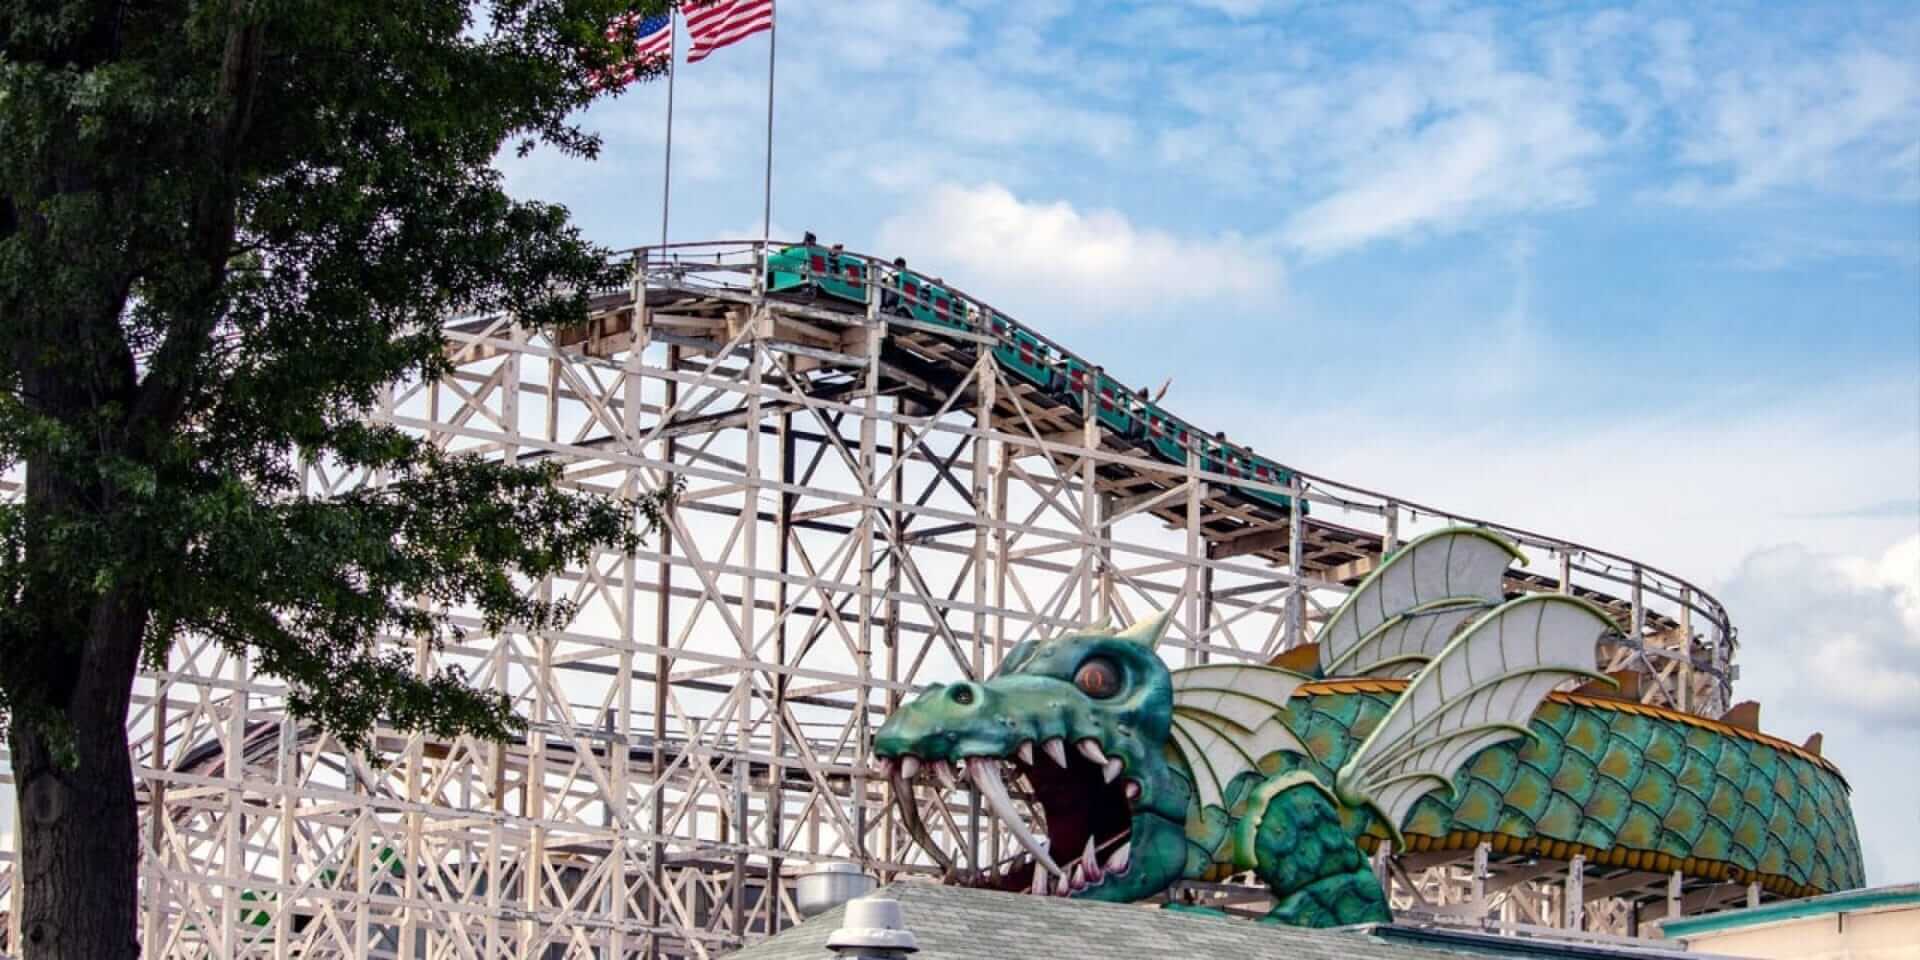 Take a ride on the Rye Playland Dragoncoaster